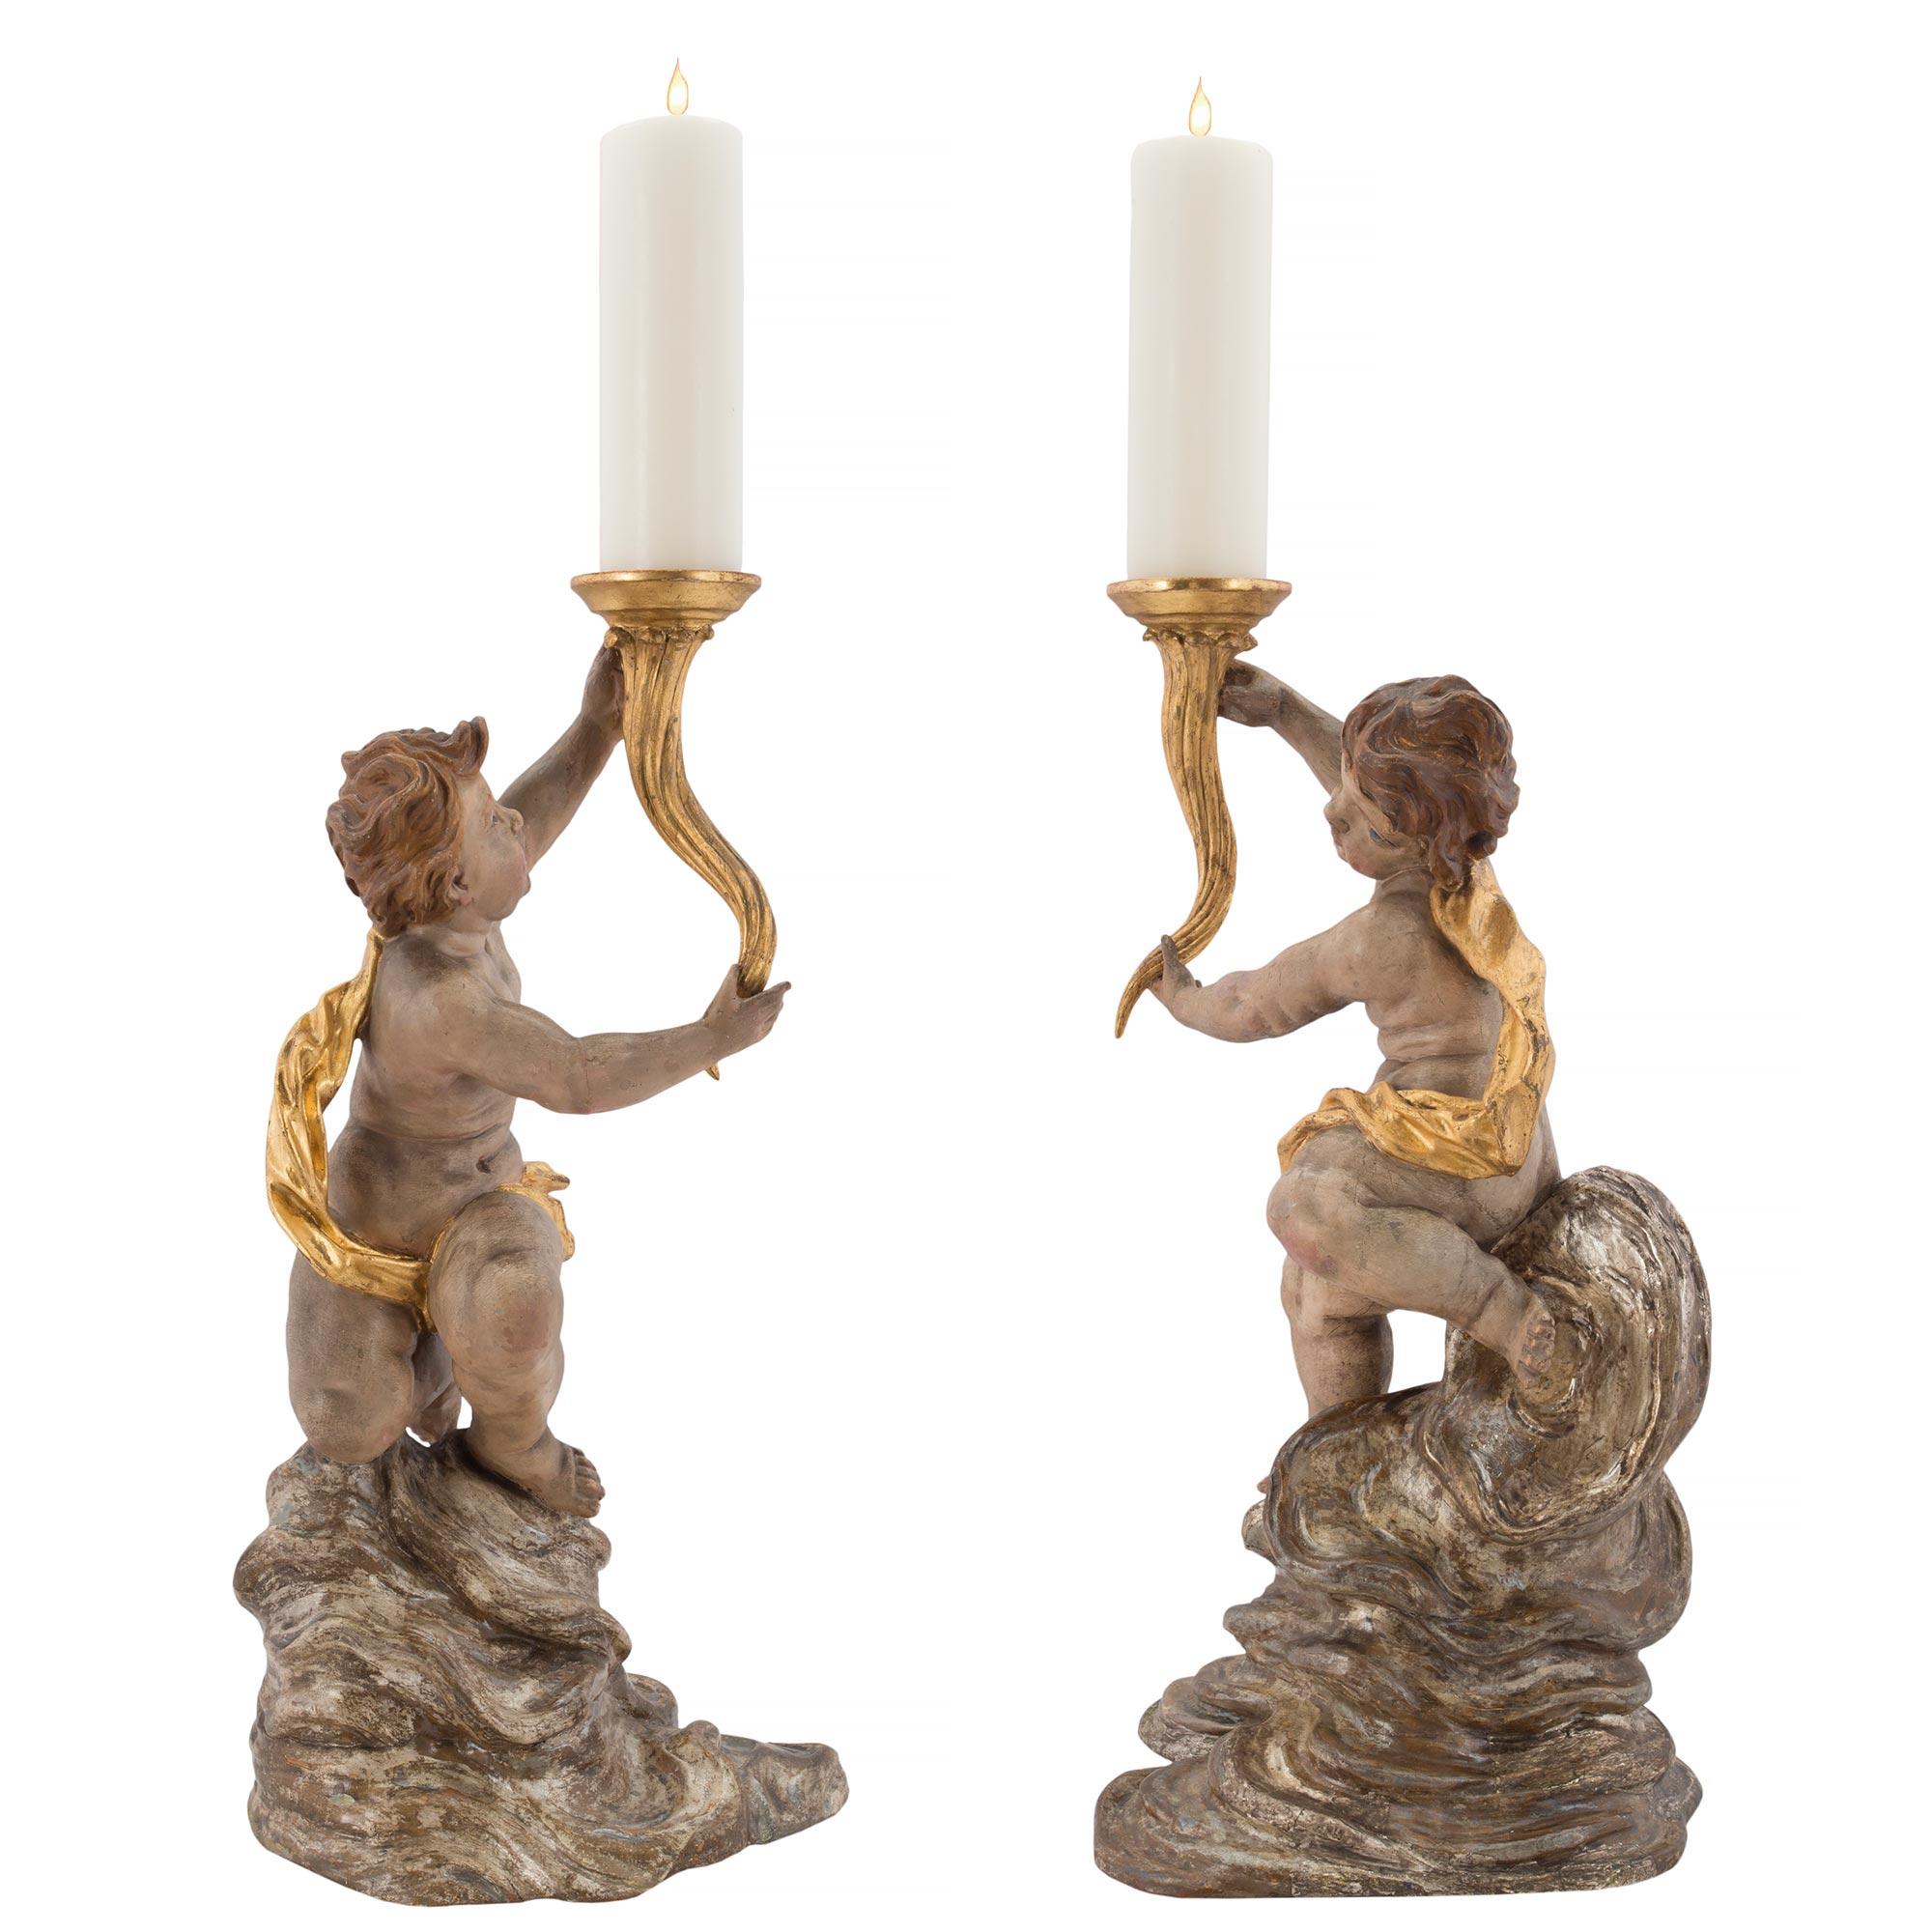 A pair of stunning Italian early 18th century candle stands from northern Italy. Each charming cherub rests on polychrome silver leaf designed clouds. The patinated cherubs are adorned with a flowing giltwood drape and raise up a cornucopia styled